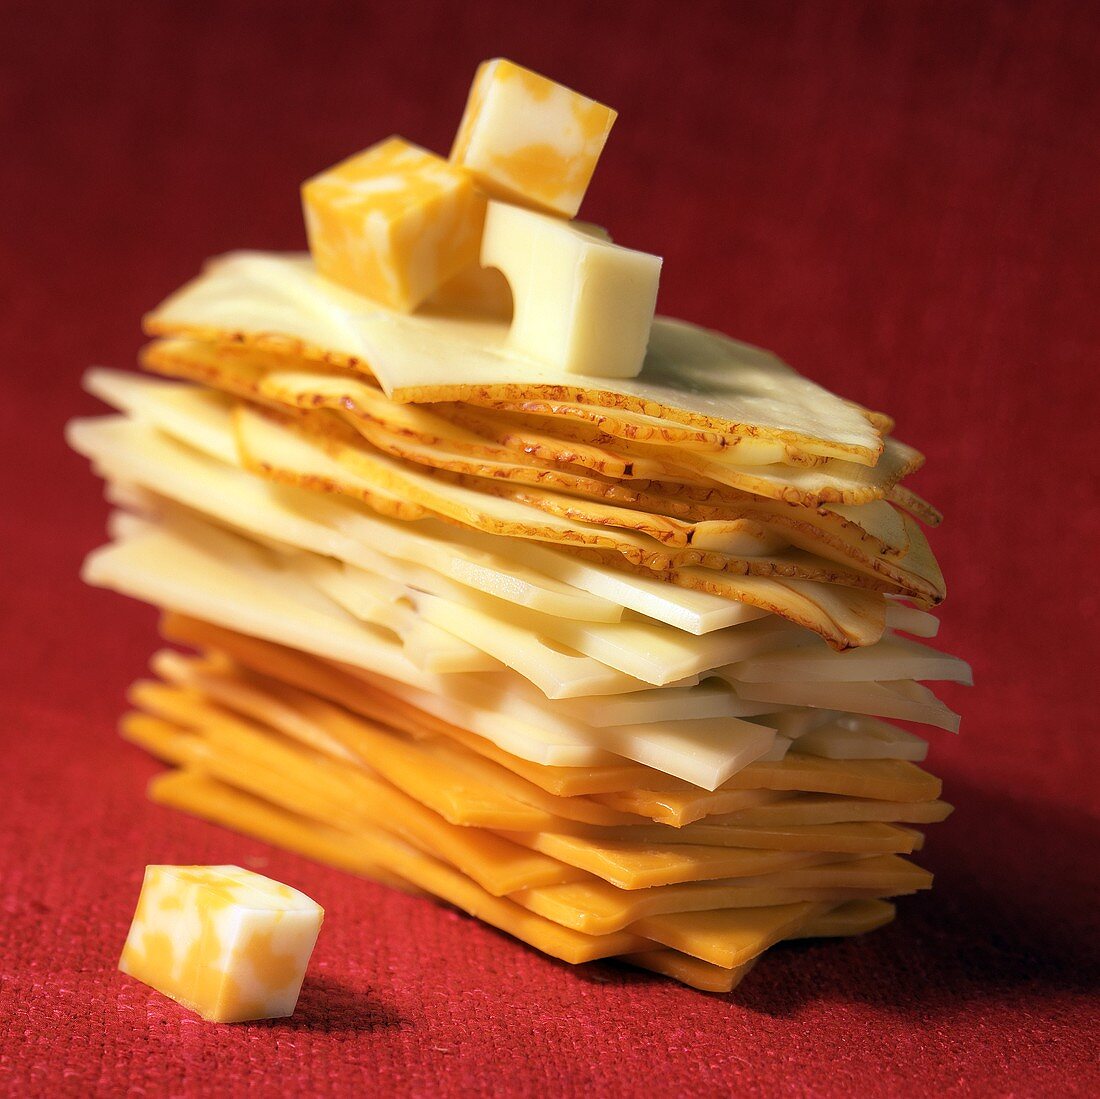 Slices of different types of cheese and diced cheese in pile